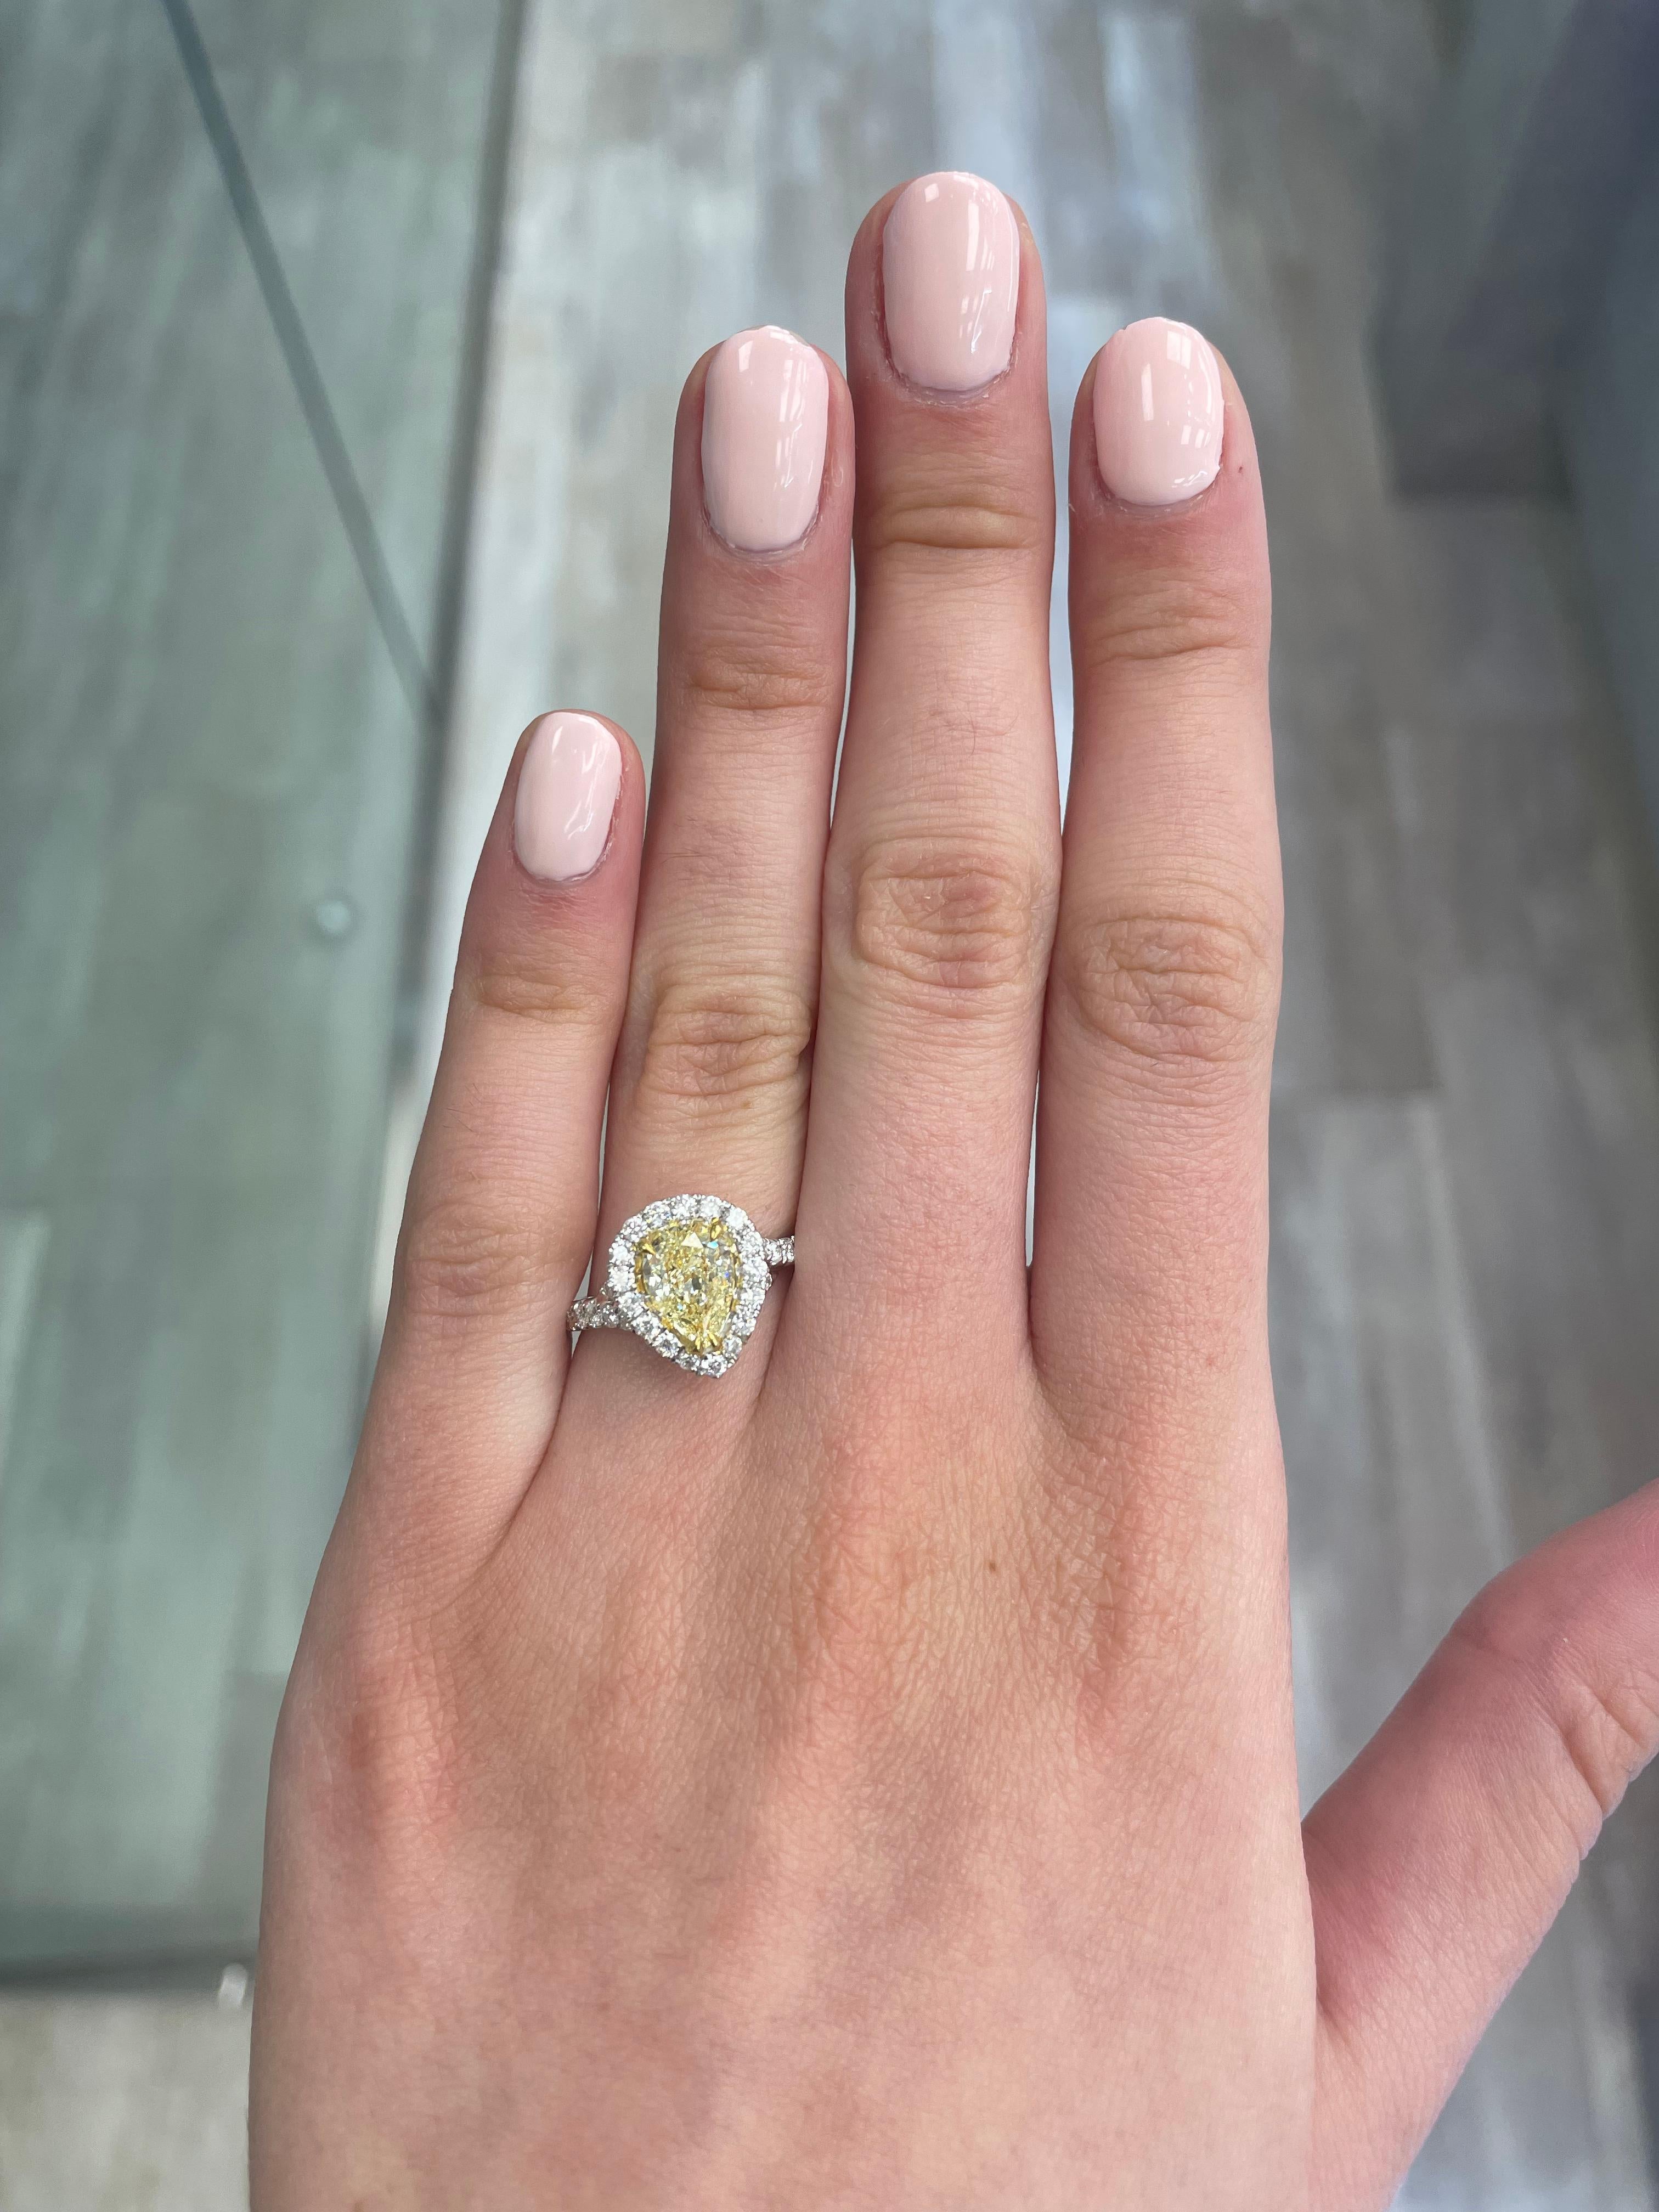 Stunning modern EGL certified yellow diamond with halo ring, two-tone 18k yellow and white gold. By Alexander Beverly Hills
1.89carats total diamond weight.
1.23 carat pear shape Fancy Yellow color and SI2 clarity diamond, EGL graded. Complimented